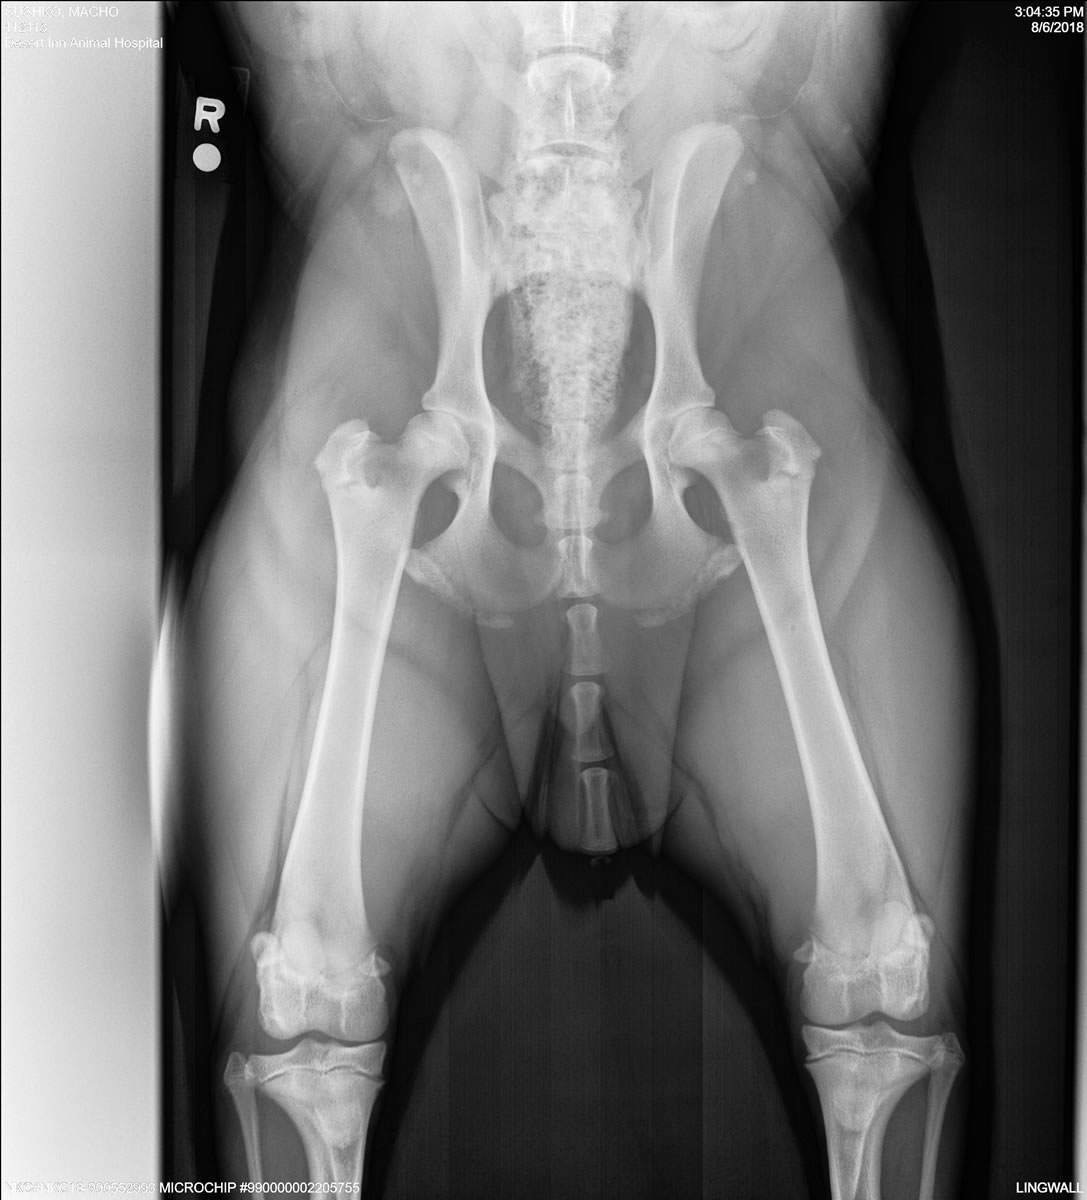 PennHip - Extended Hip Radiograph